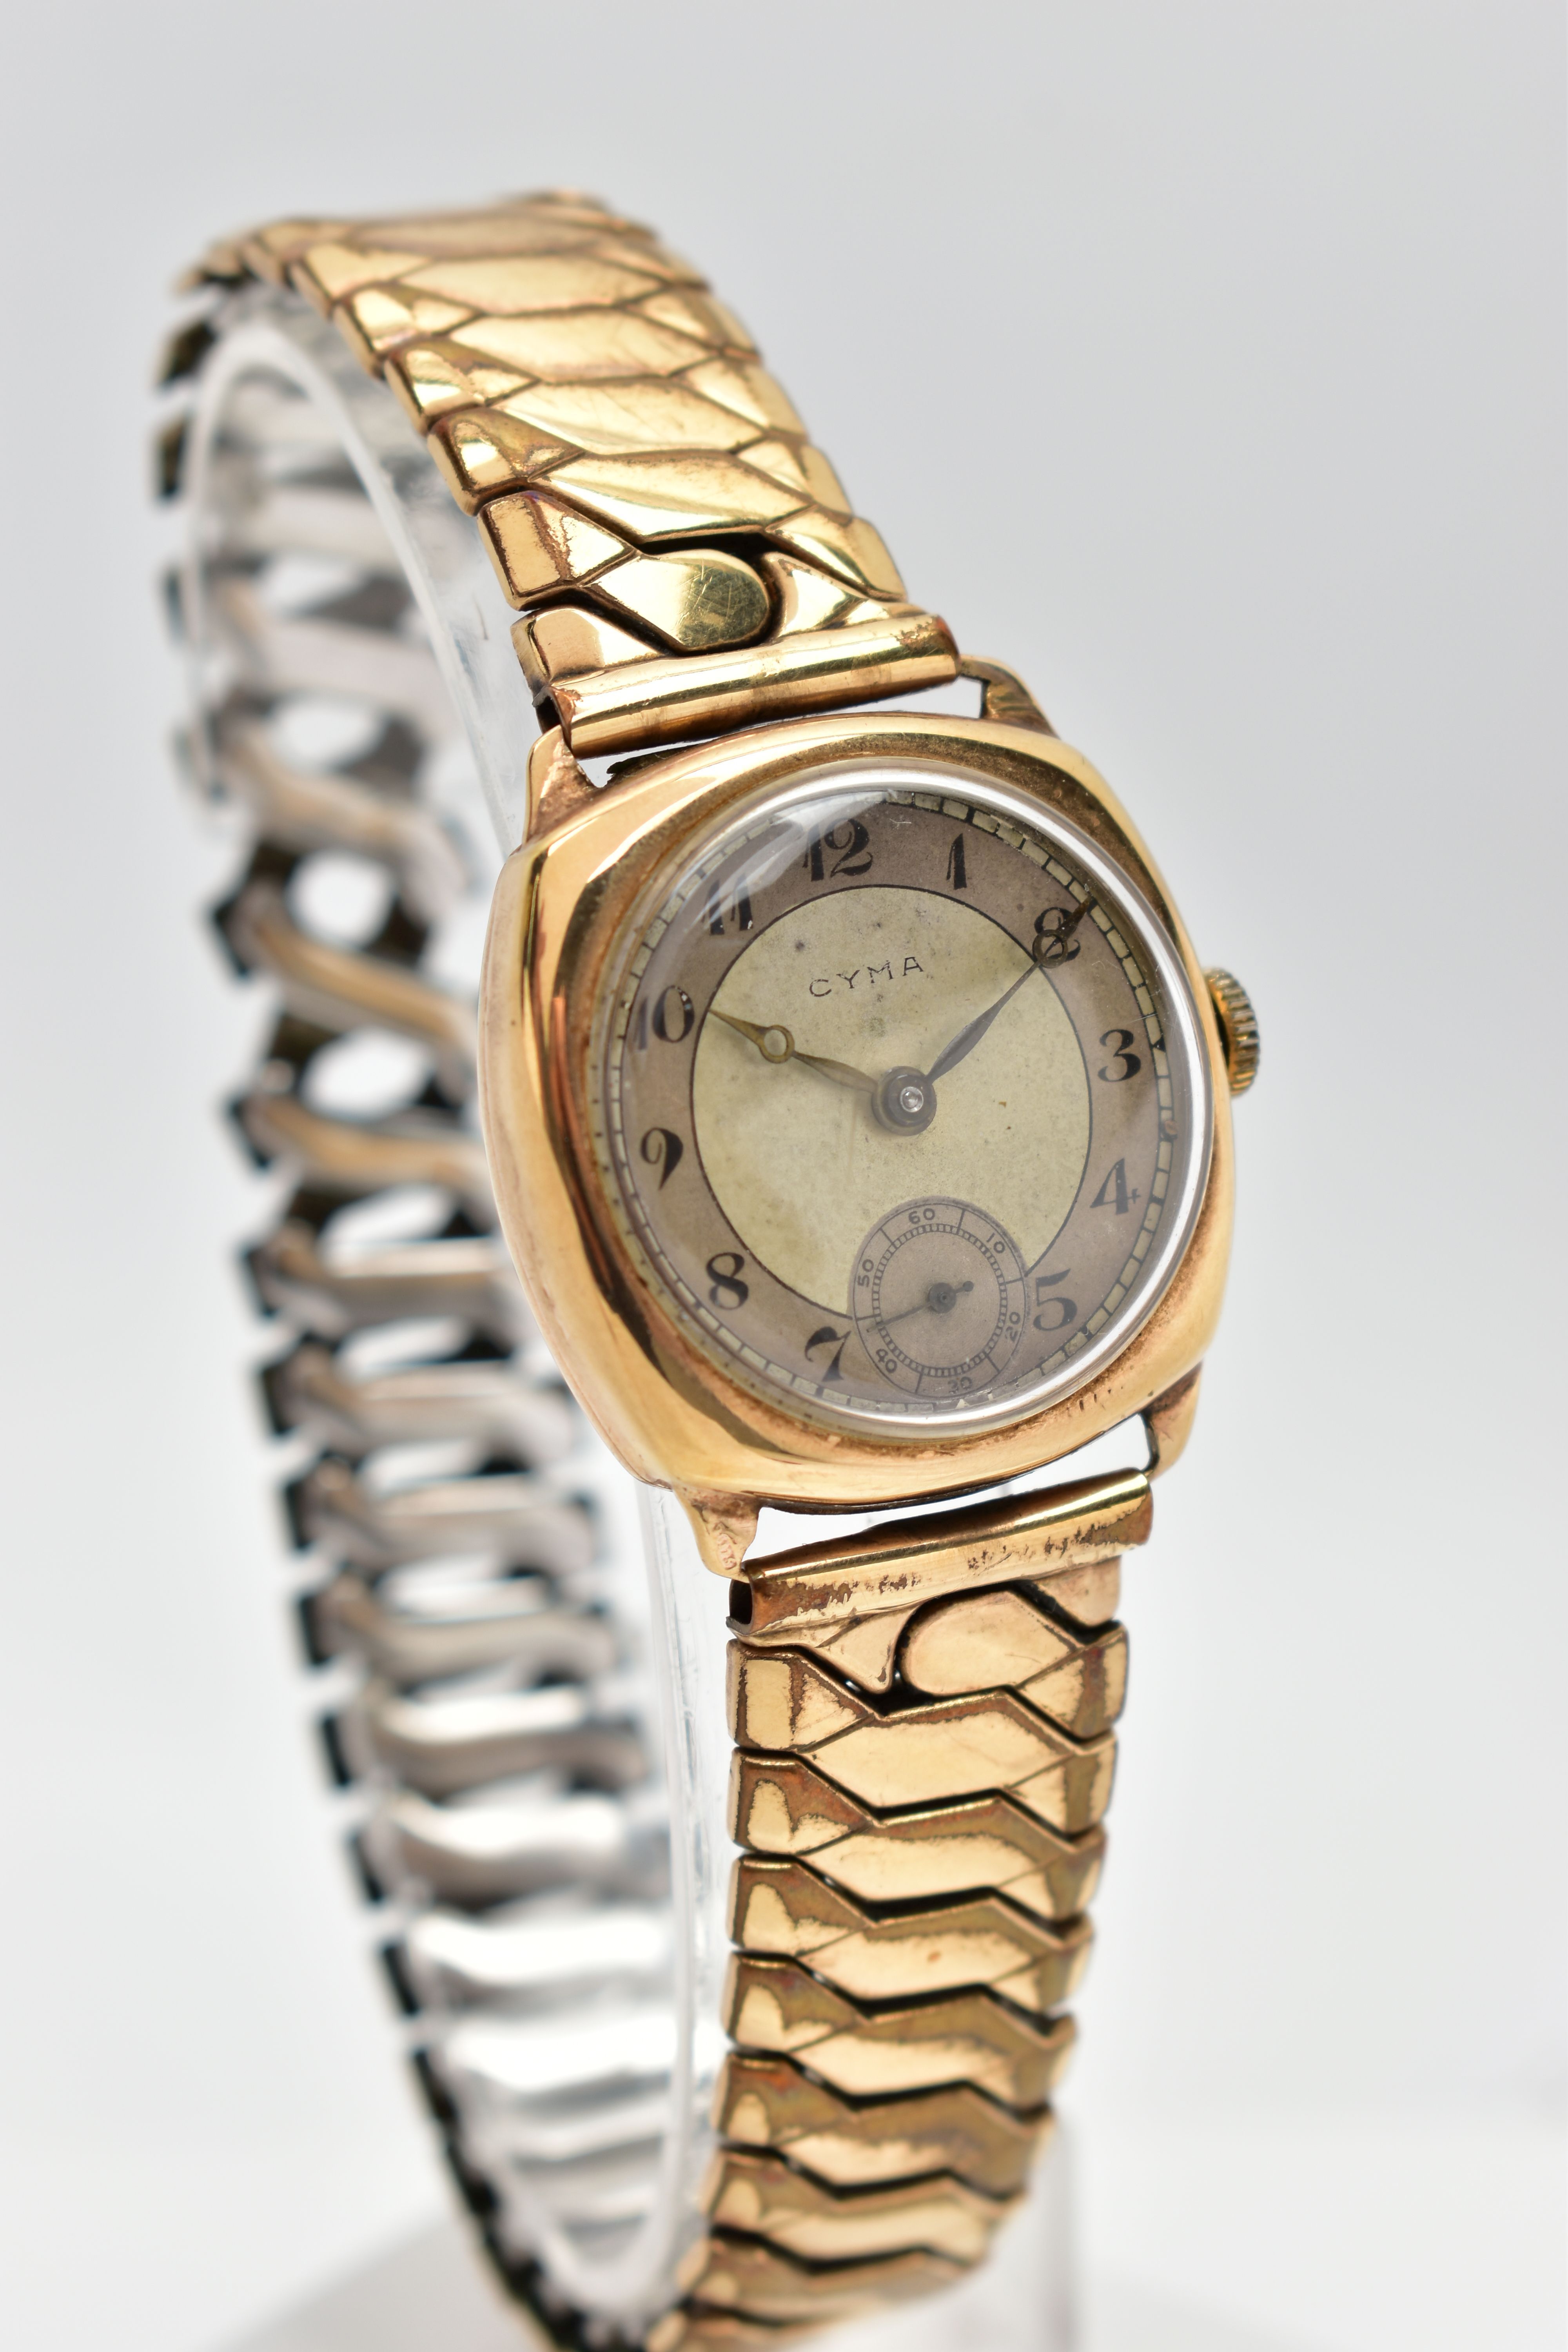 A 9CT GOLD 'CYMA' WRISTWATCH, manual wind, round silver dial signed 'Cyma', Arabic numerals, - Image 2 of 6